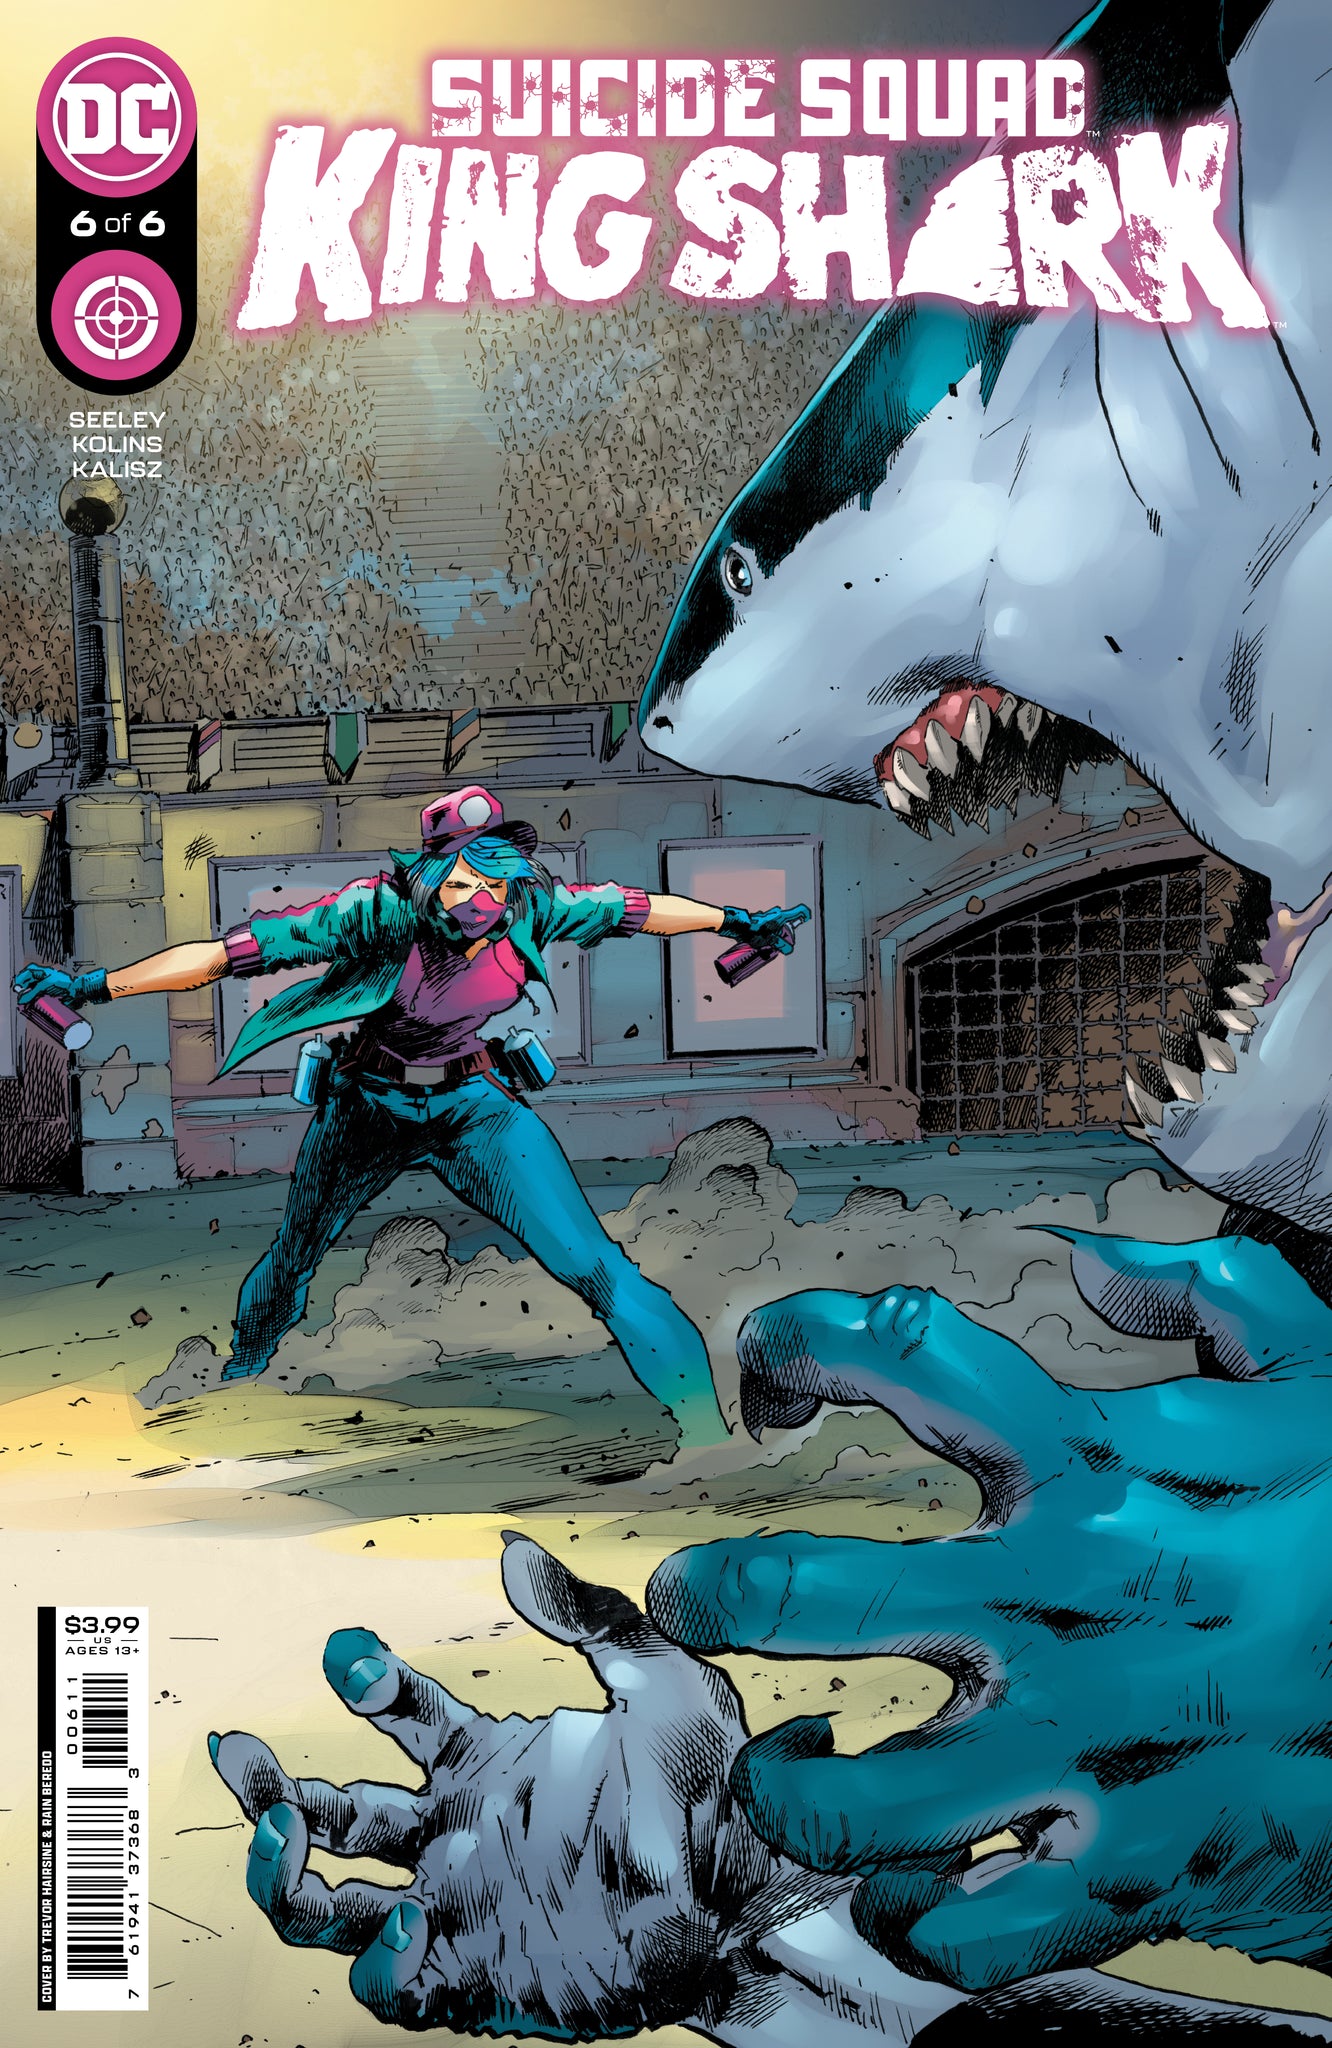 SUICIDE SQUAD KING SHARK #6 (OF 6)